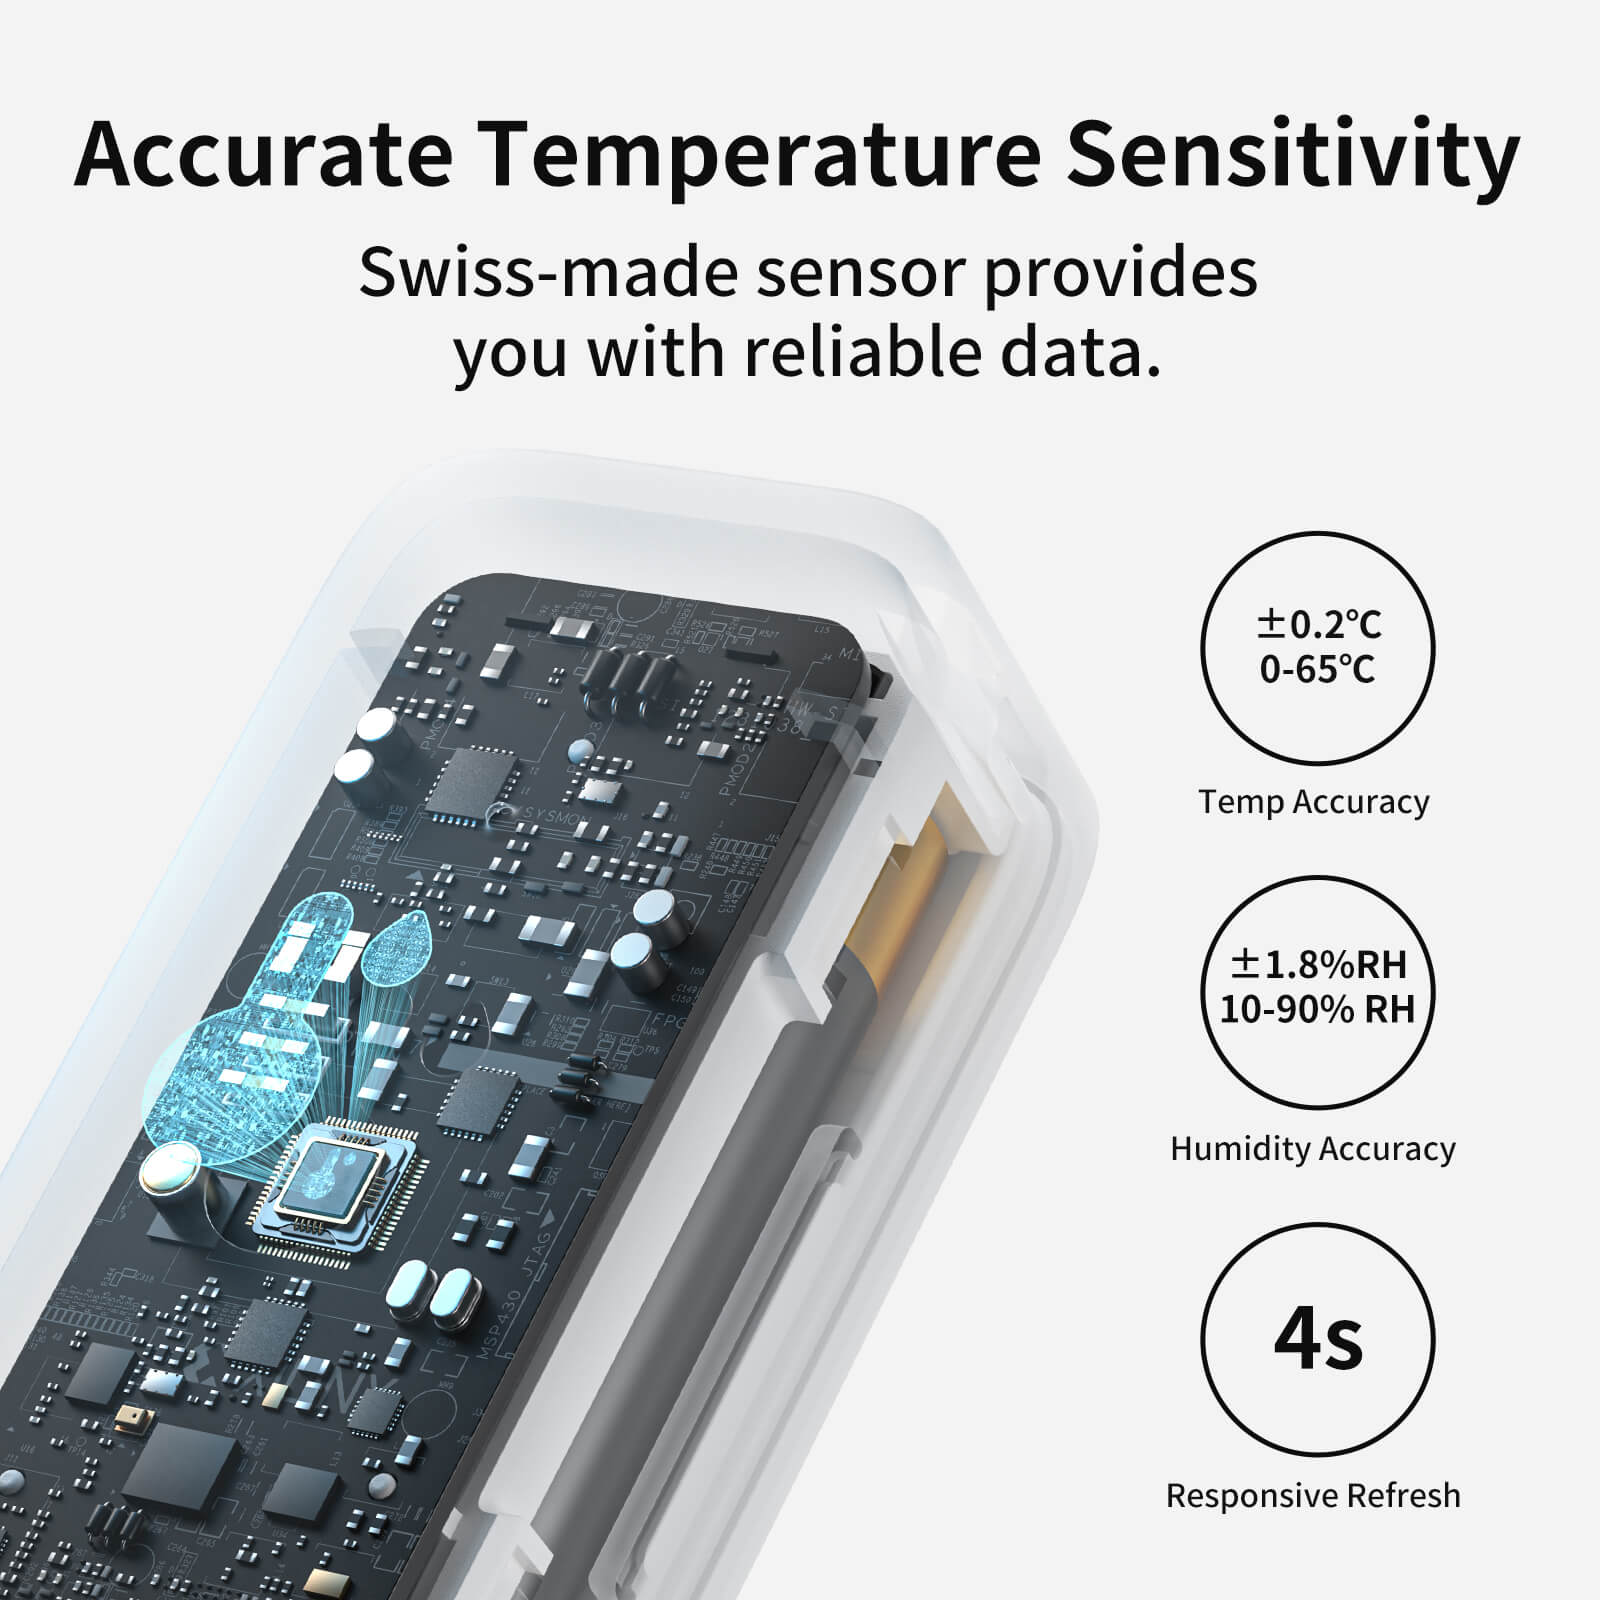 Accurate Humidity and Temperature Sensor for Outdoor Applications